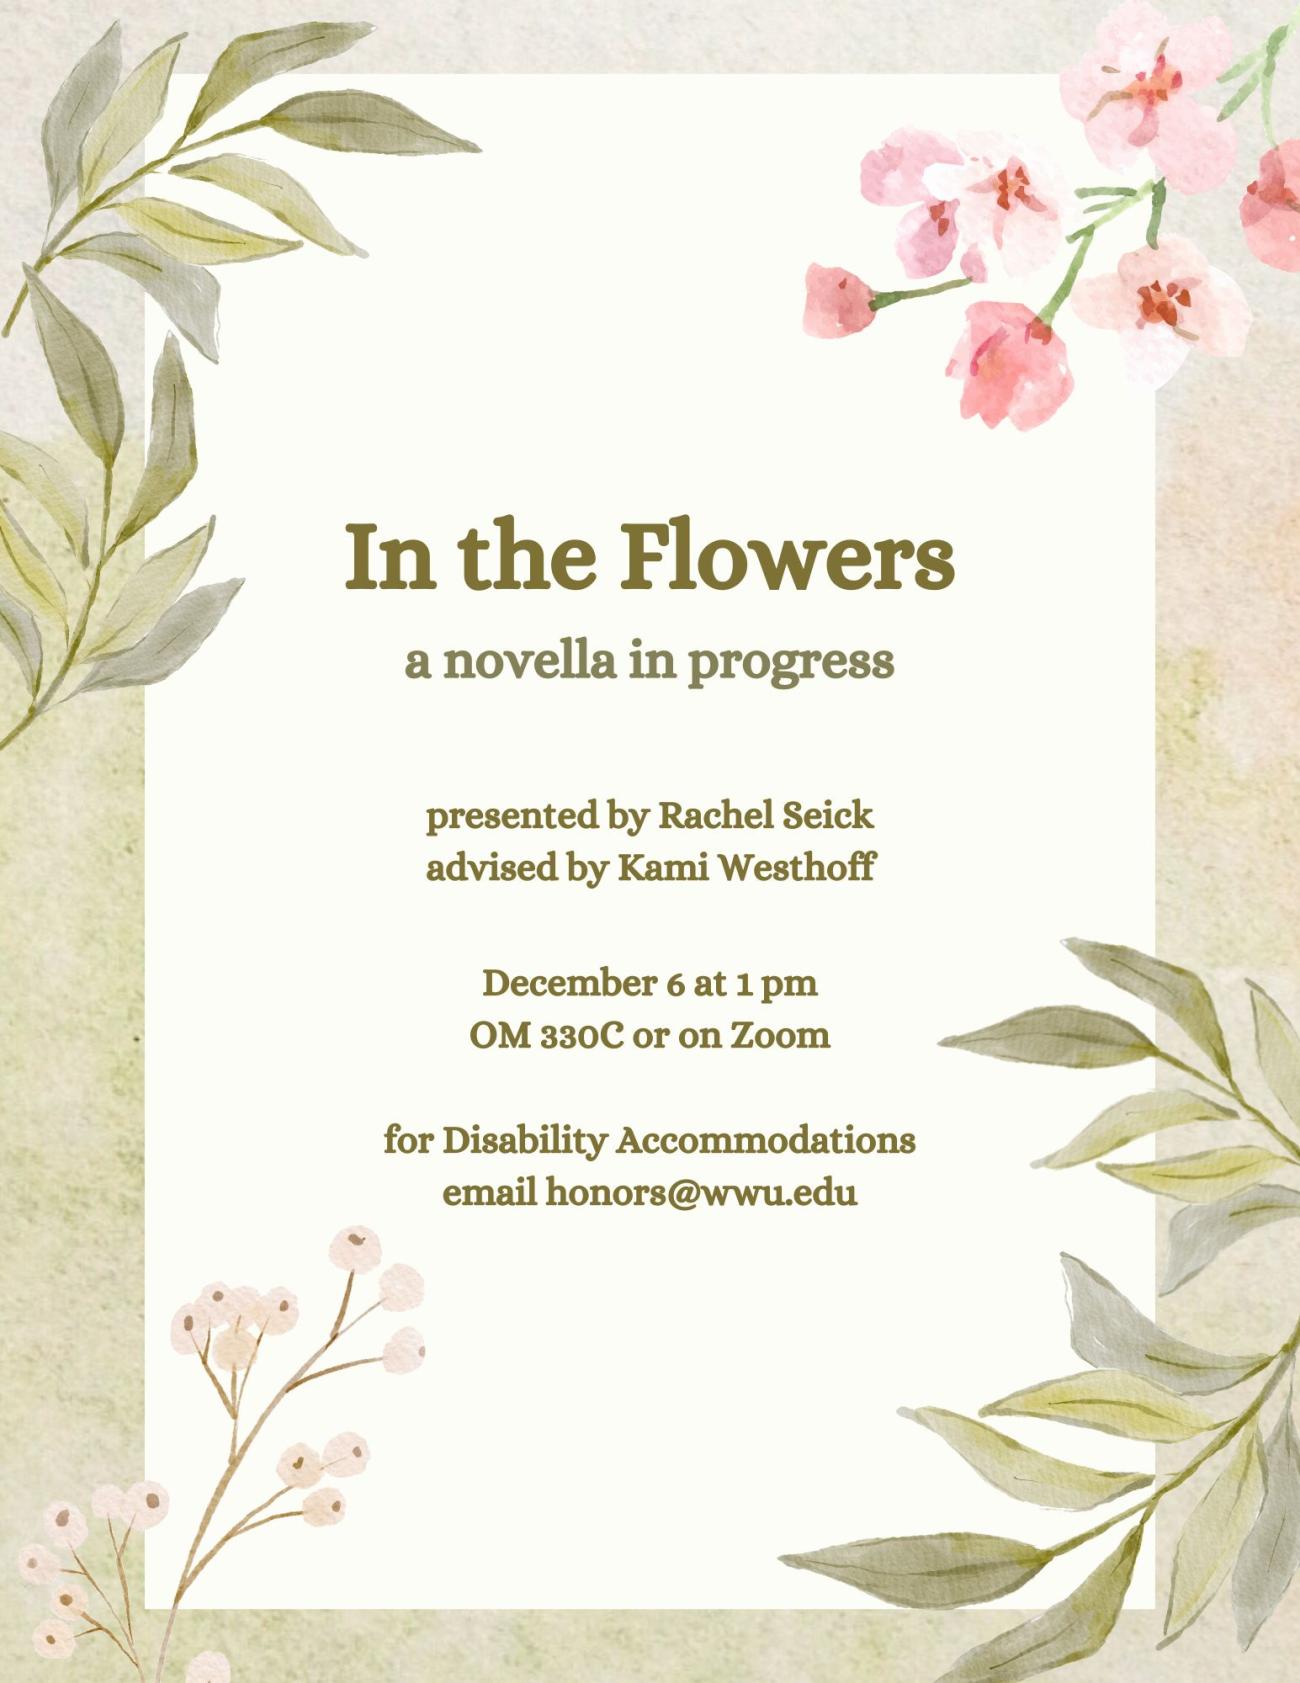 A tan poster with a darker border framed with flowers. The text reads: "In the Flowers: a novella in progress, presented by Rachel Seick, advised by Kami Westhoff, December 6 at 1 pm, OM330C or on Zoom, for Disability Accommodations email honors@wwu.edu."